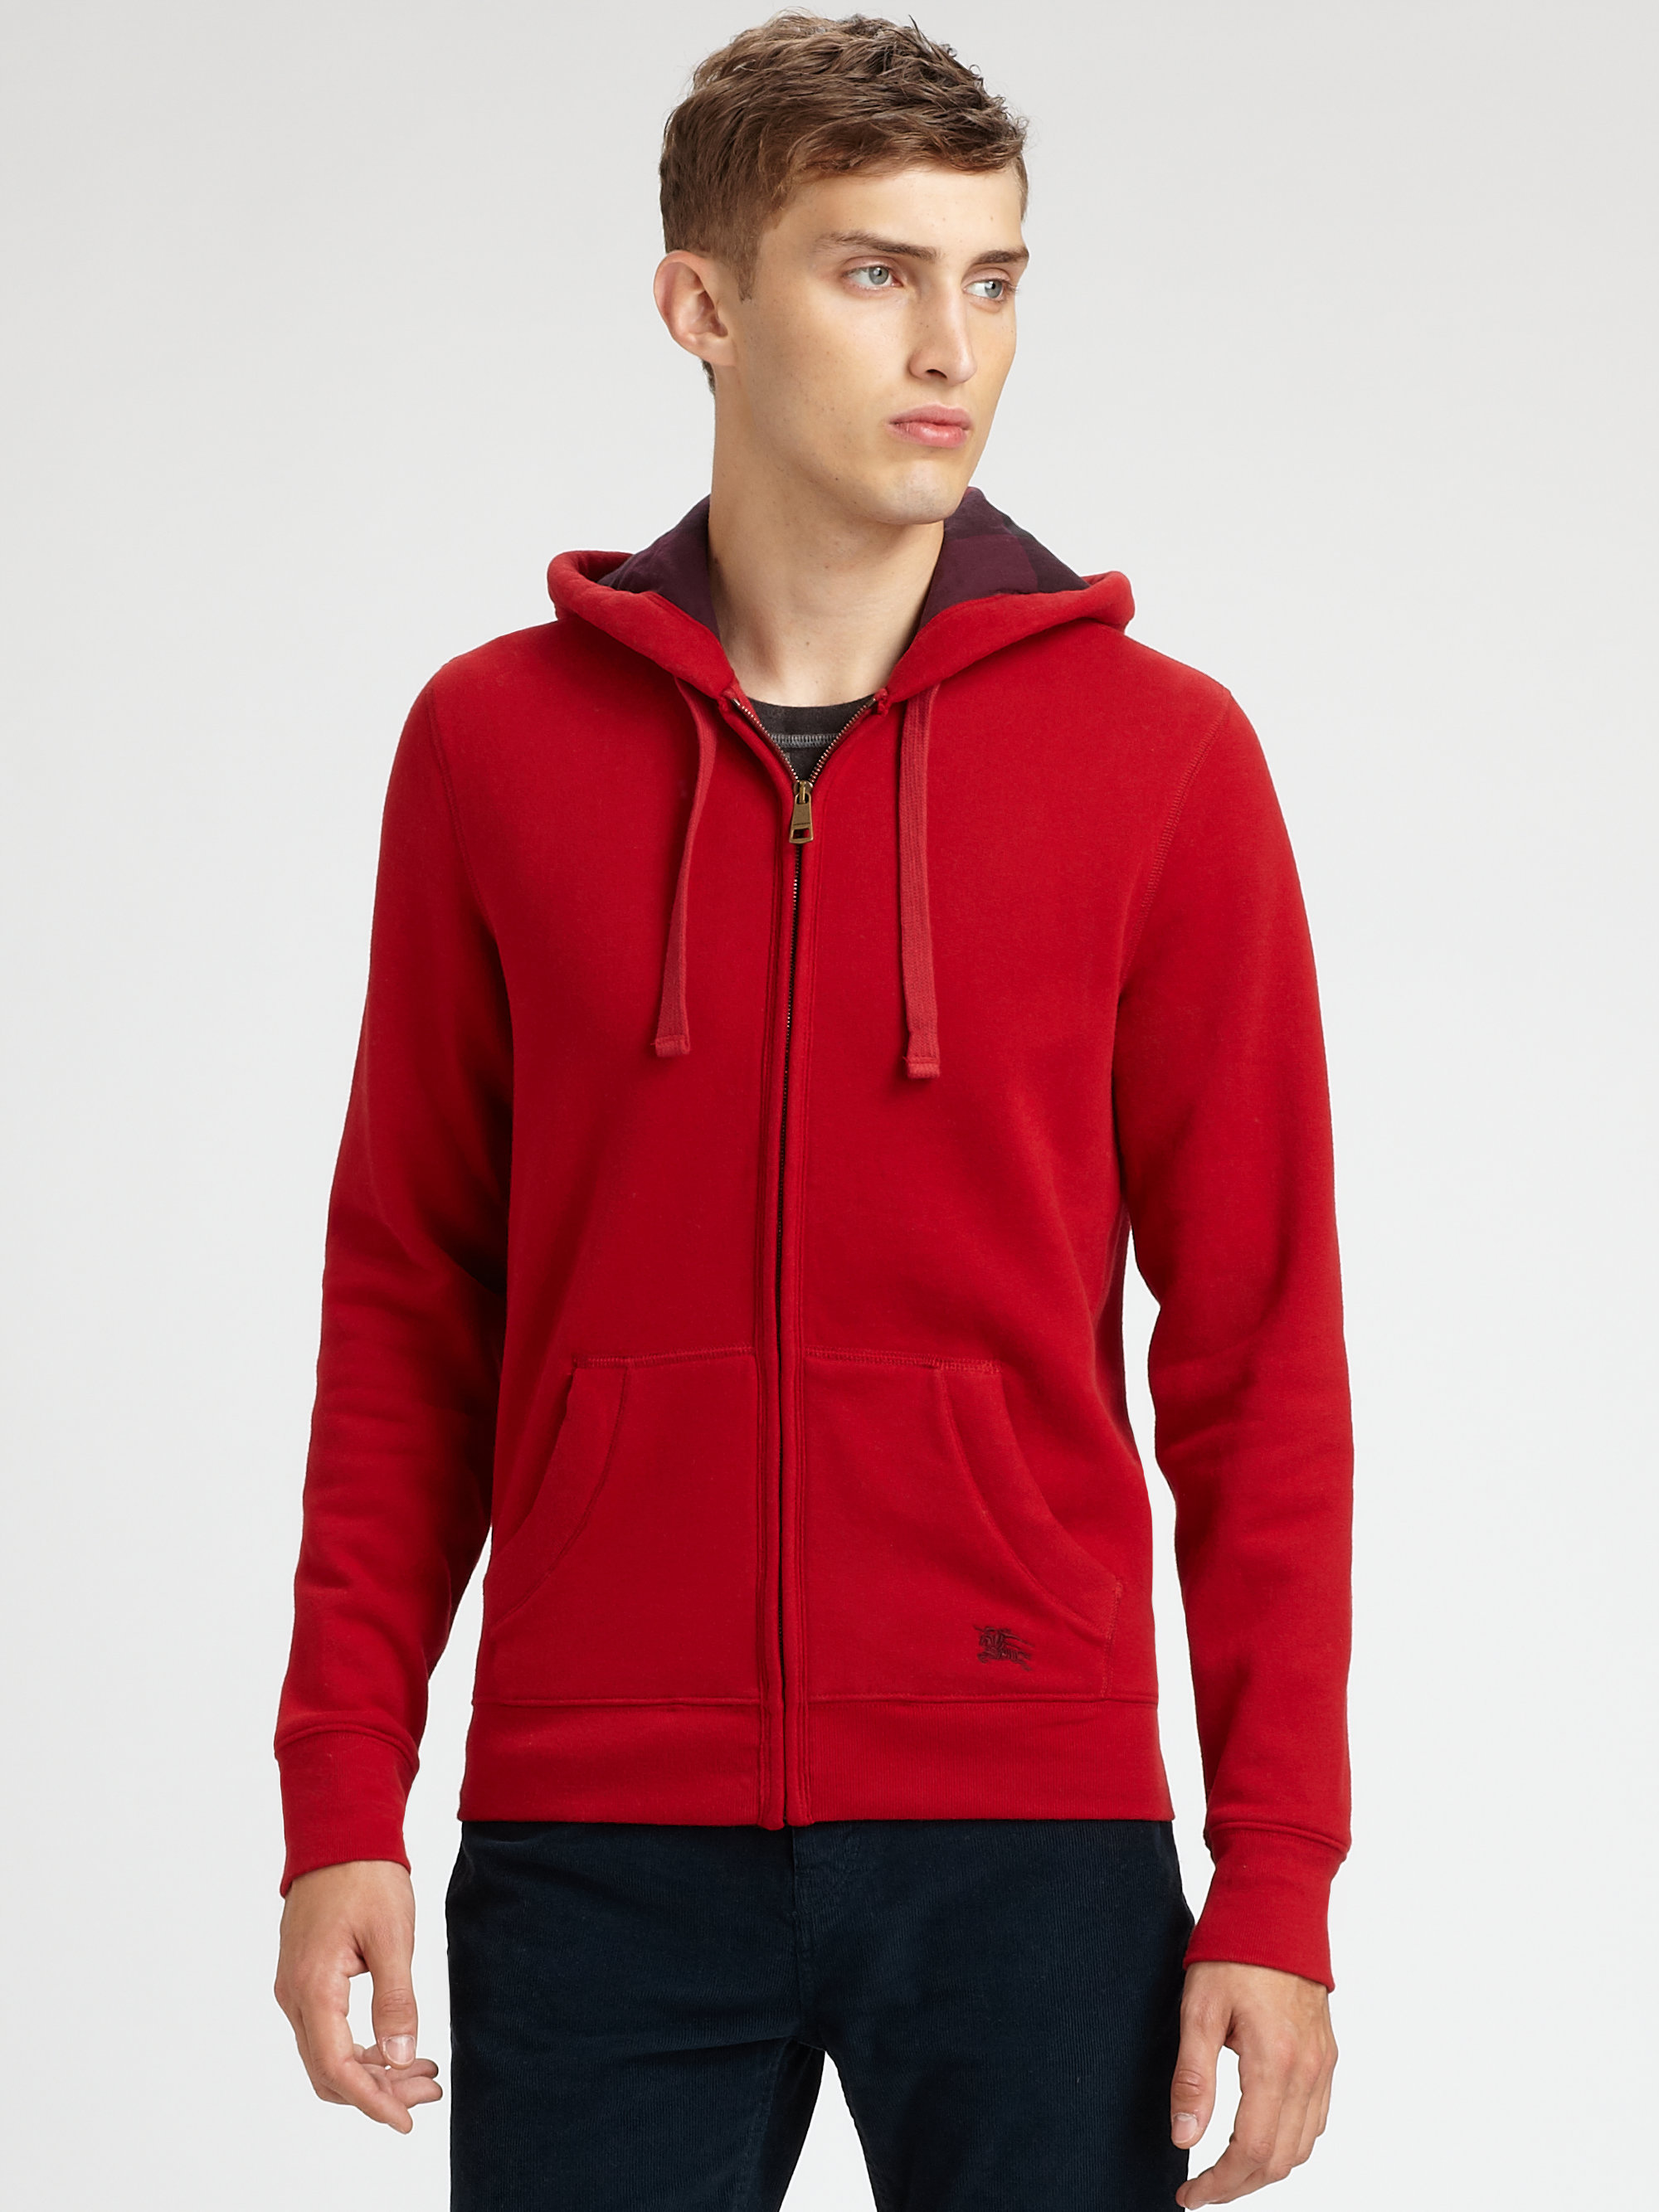 Lyst - Burberry brit Hooded Sweatshirt in Red for Men